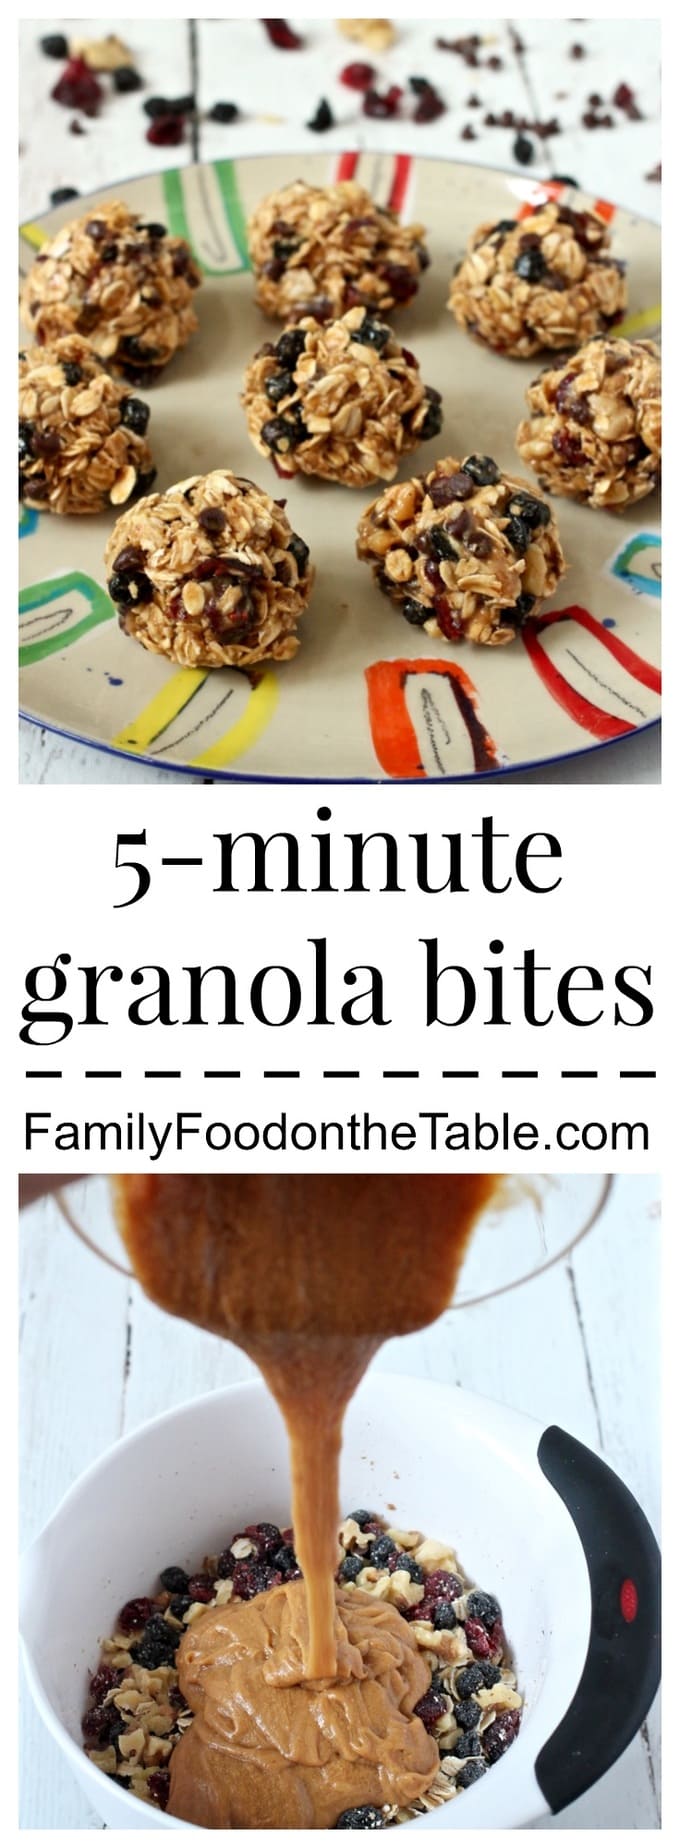 A wholesome snack of oats, nuts, dried fruit and chocolate chips that comes together in just 5 minutes! | FamilyFoodontheTable.com